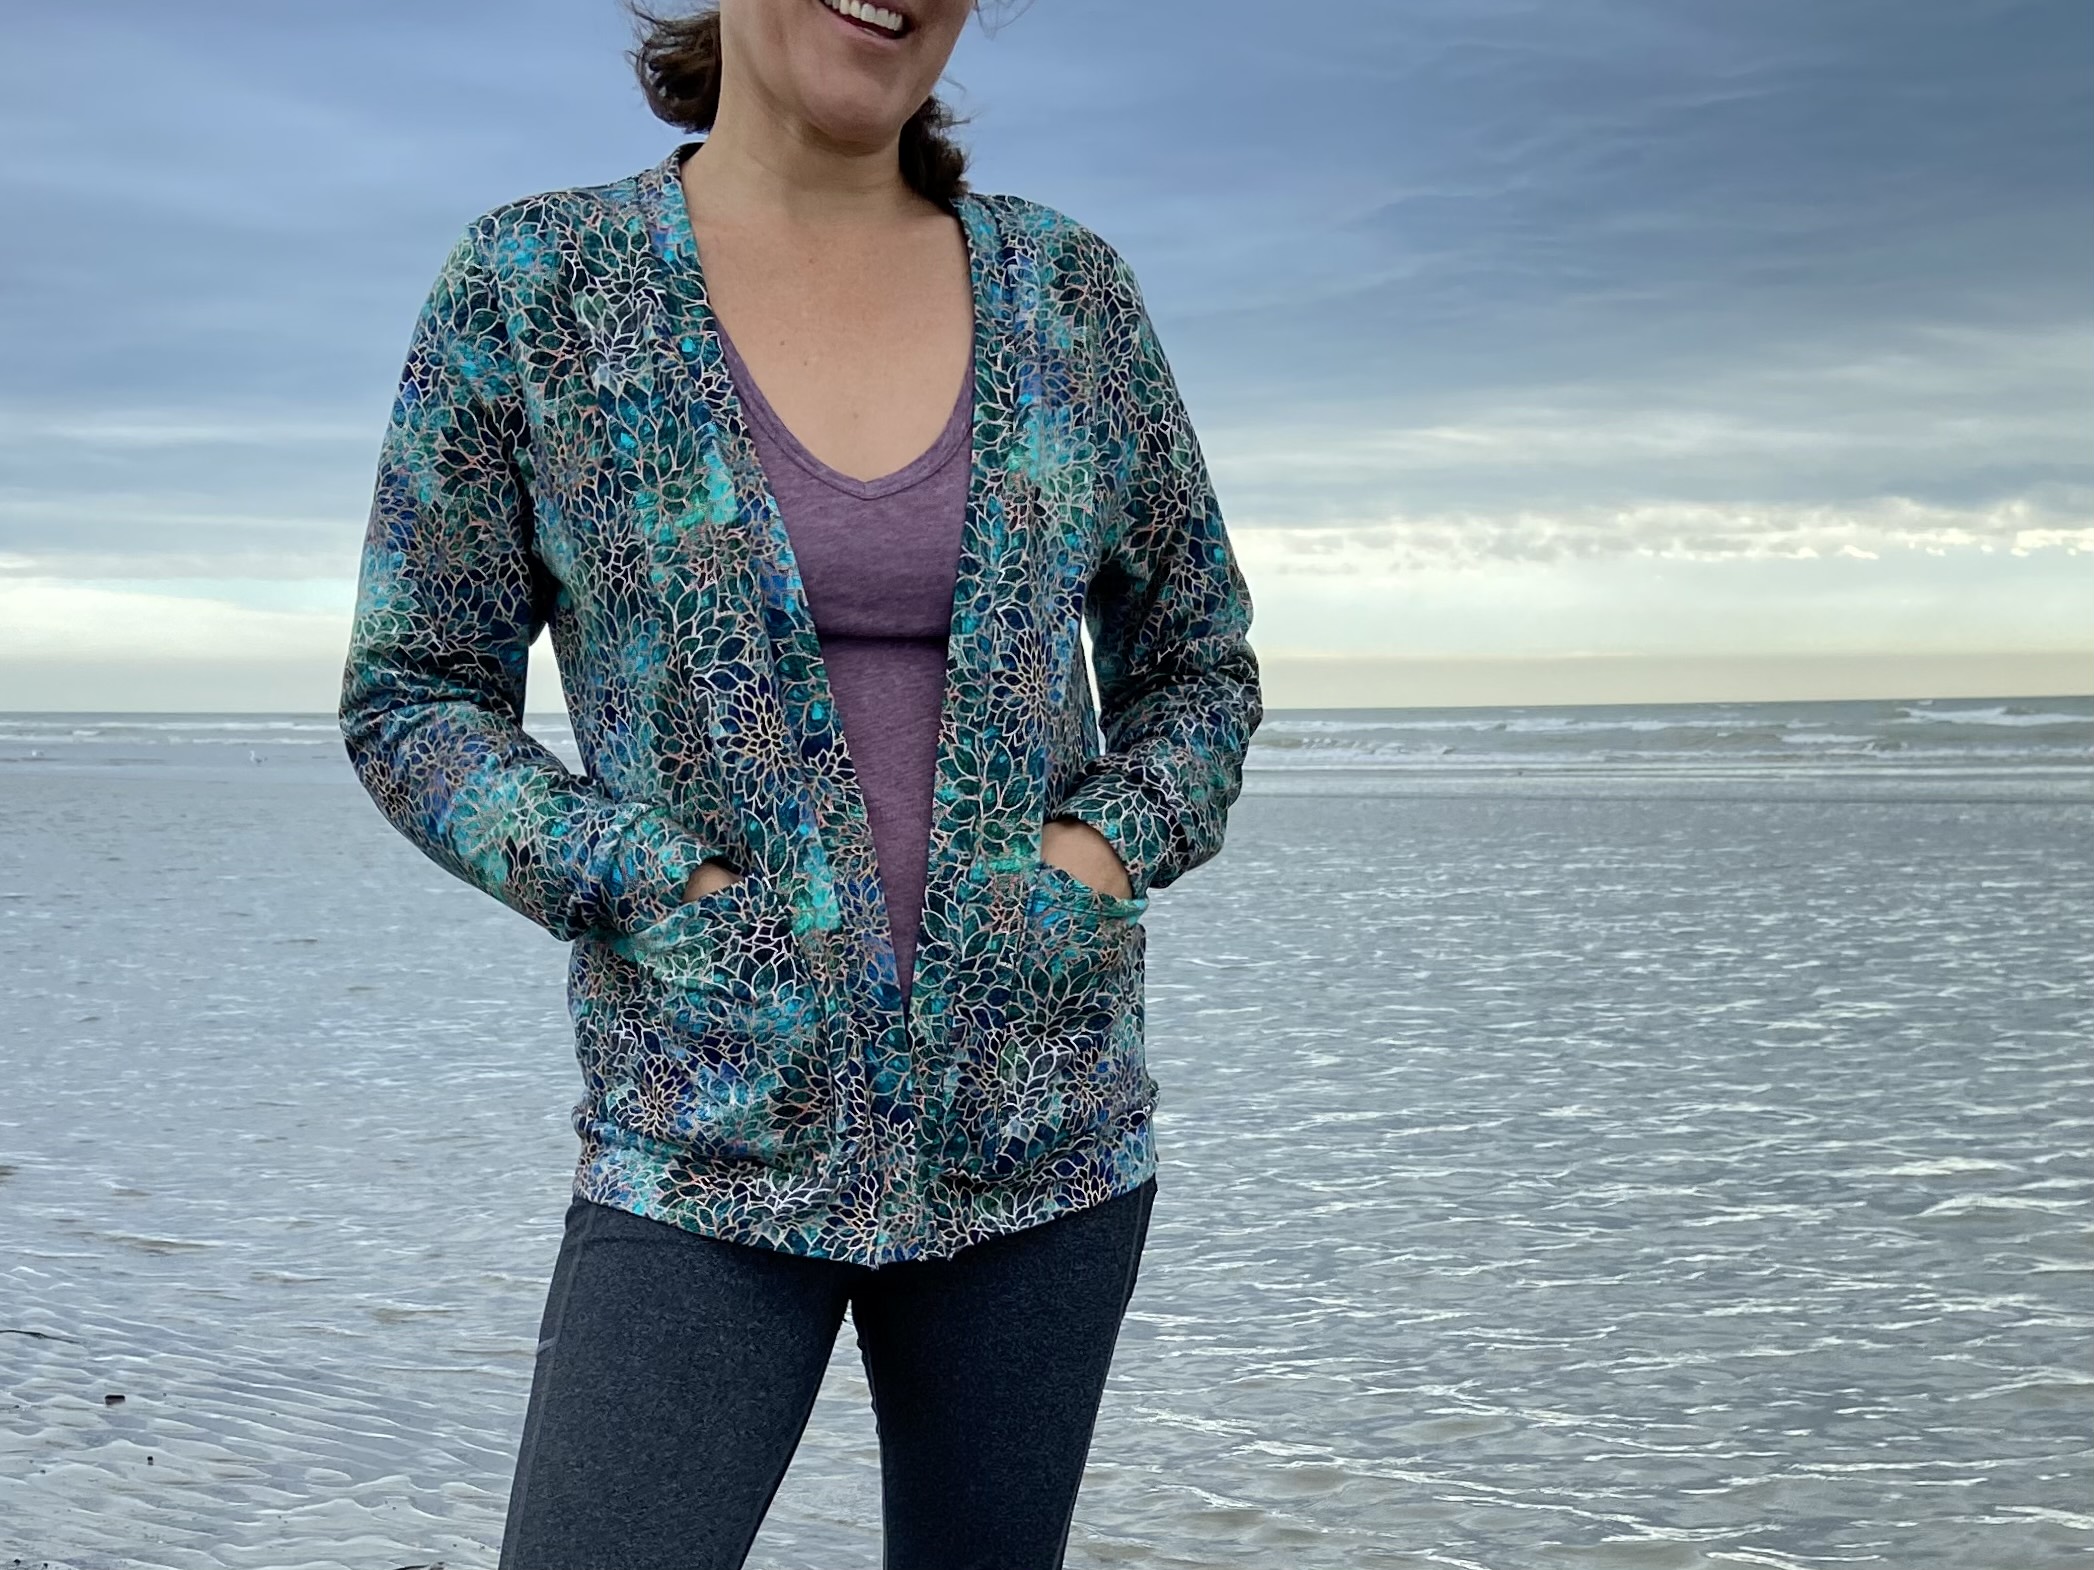 Woman wearing the Women's Salt Air Cardigan sewing pattern from Waves & Wild on The Fold Line. A cardigan pattern made in medium weight knits such as cotton/Lycra french terry or sweatshirt fleece fabrics, featuring a slim-fit two length options, optional button front fastenings, V-neckline and front patch pockets.